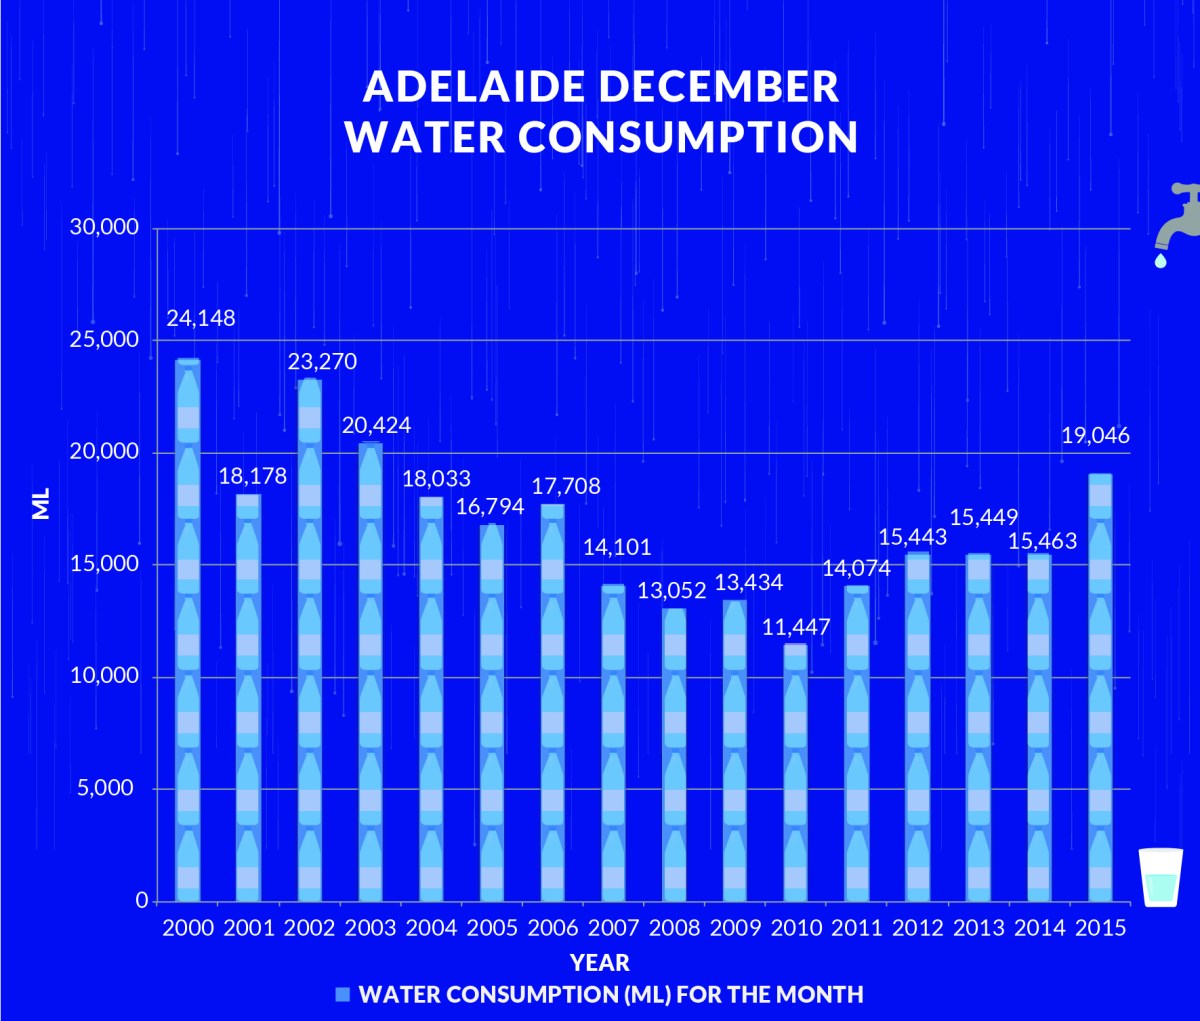 Water restrictions introduced by the State Government in resopnse to drought resulted in a dip in water use. The dryness of spring/summer this year has led to an upswing in water use. Chart by Leah Zahorujko/InDaily using SA Water data.